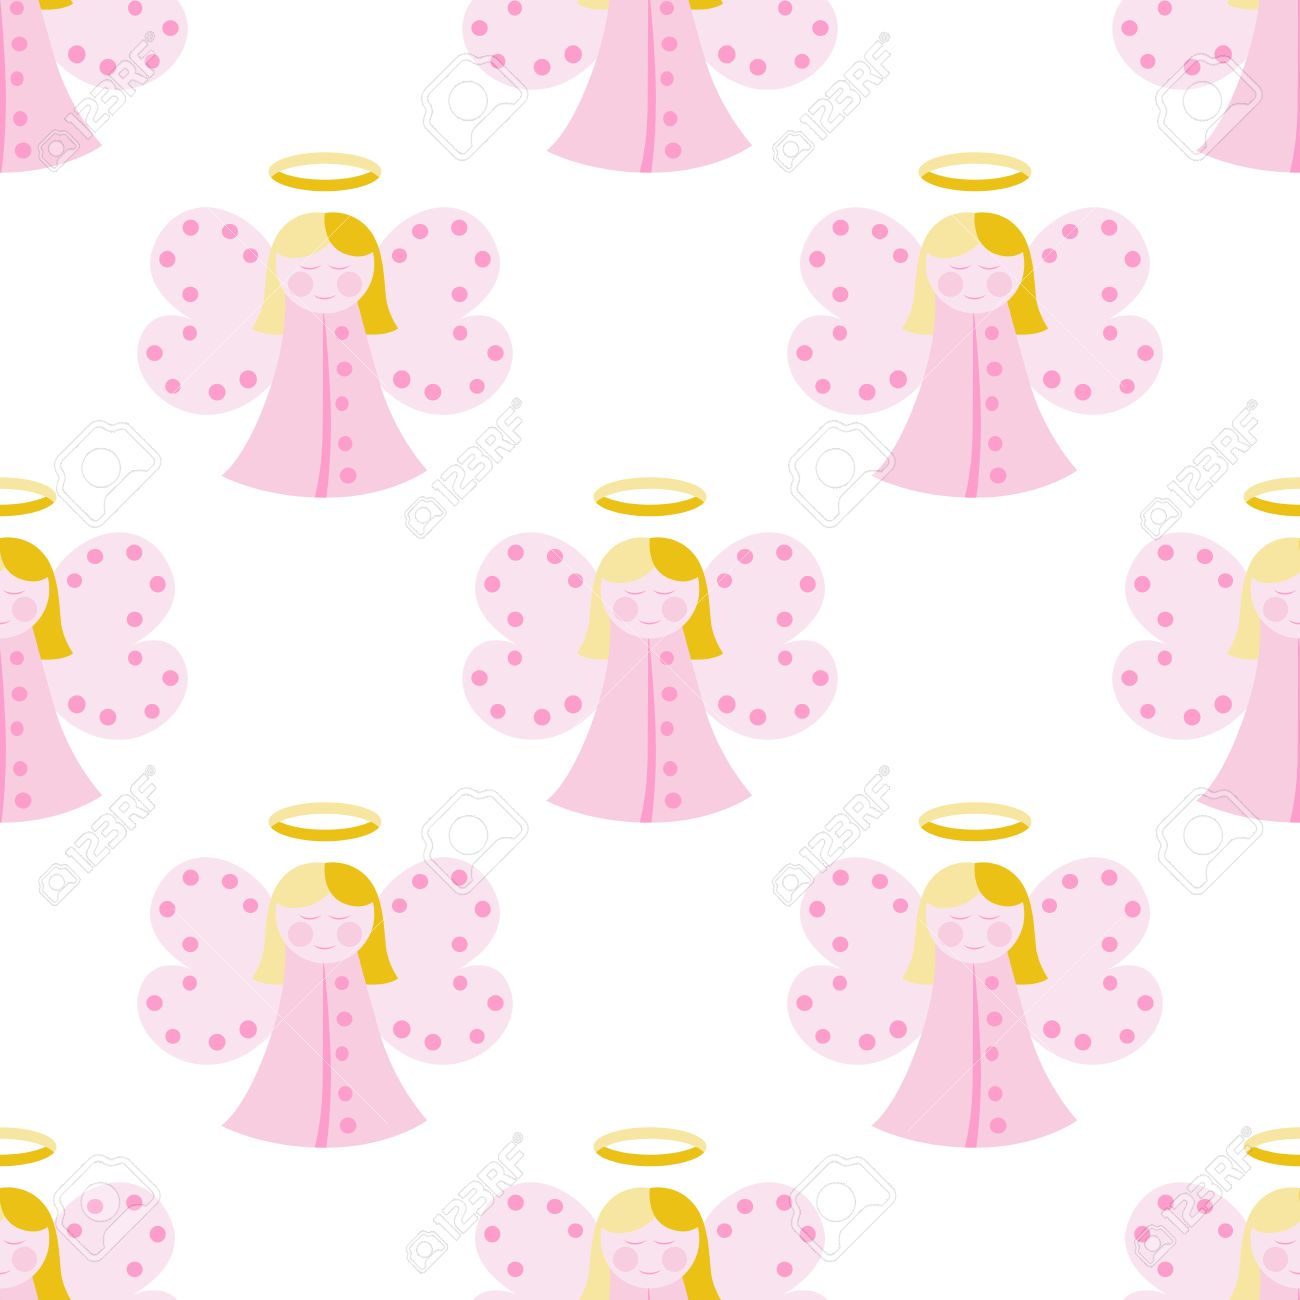 Cute Angel In Pink Clothes Seamless Pattern Isolated On White